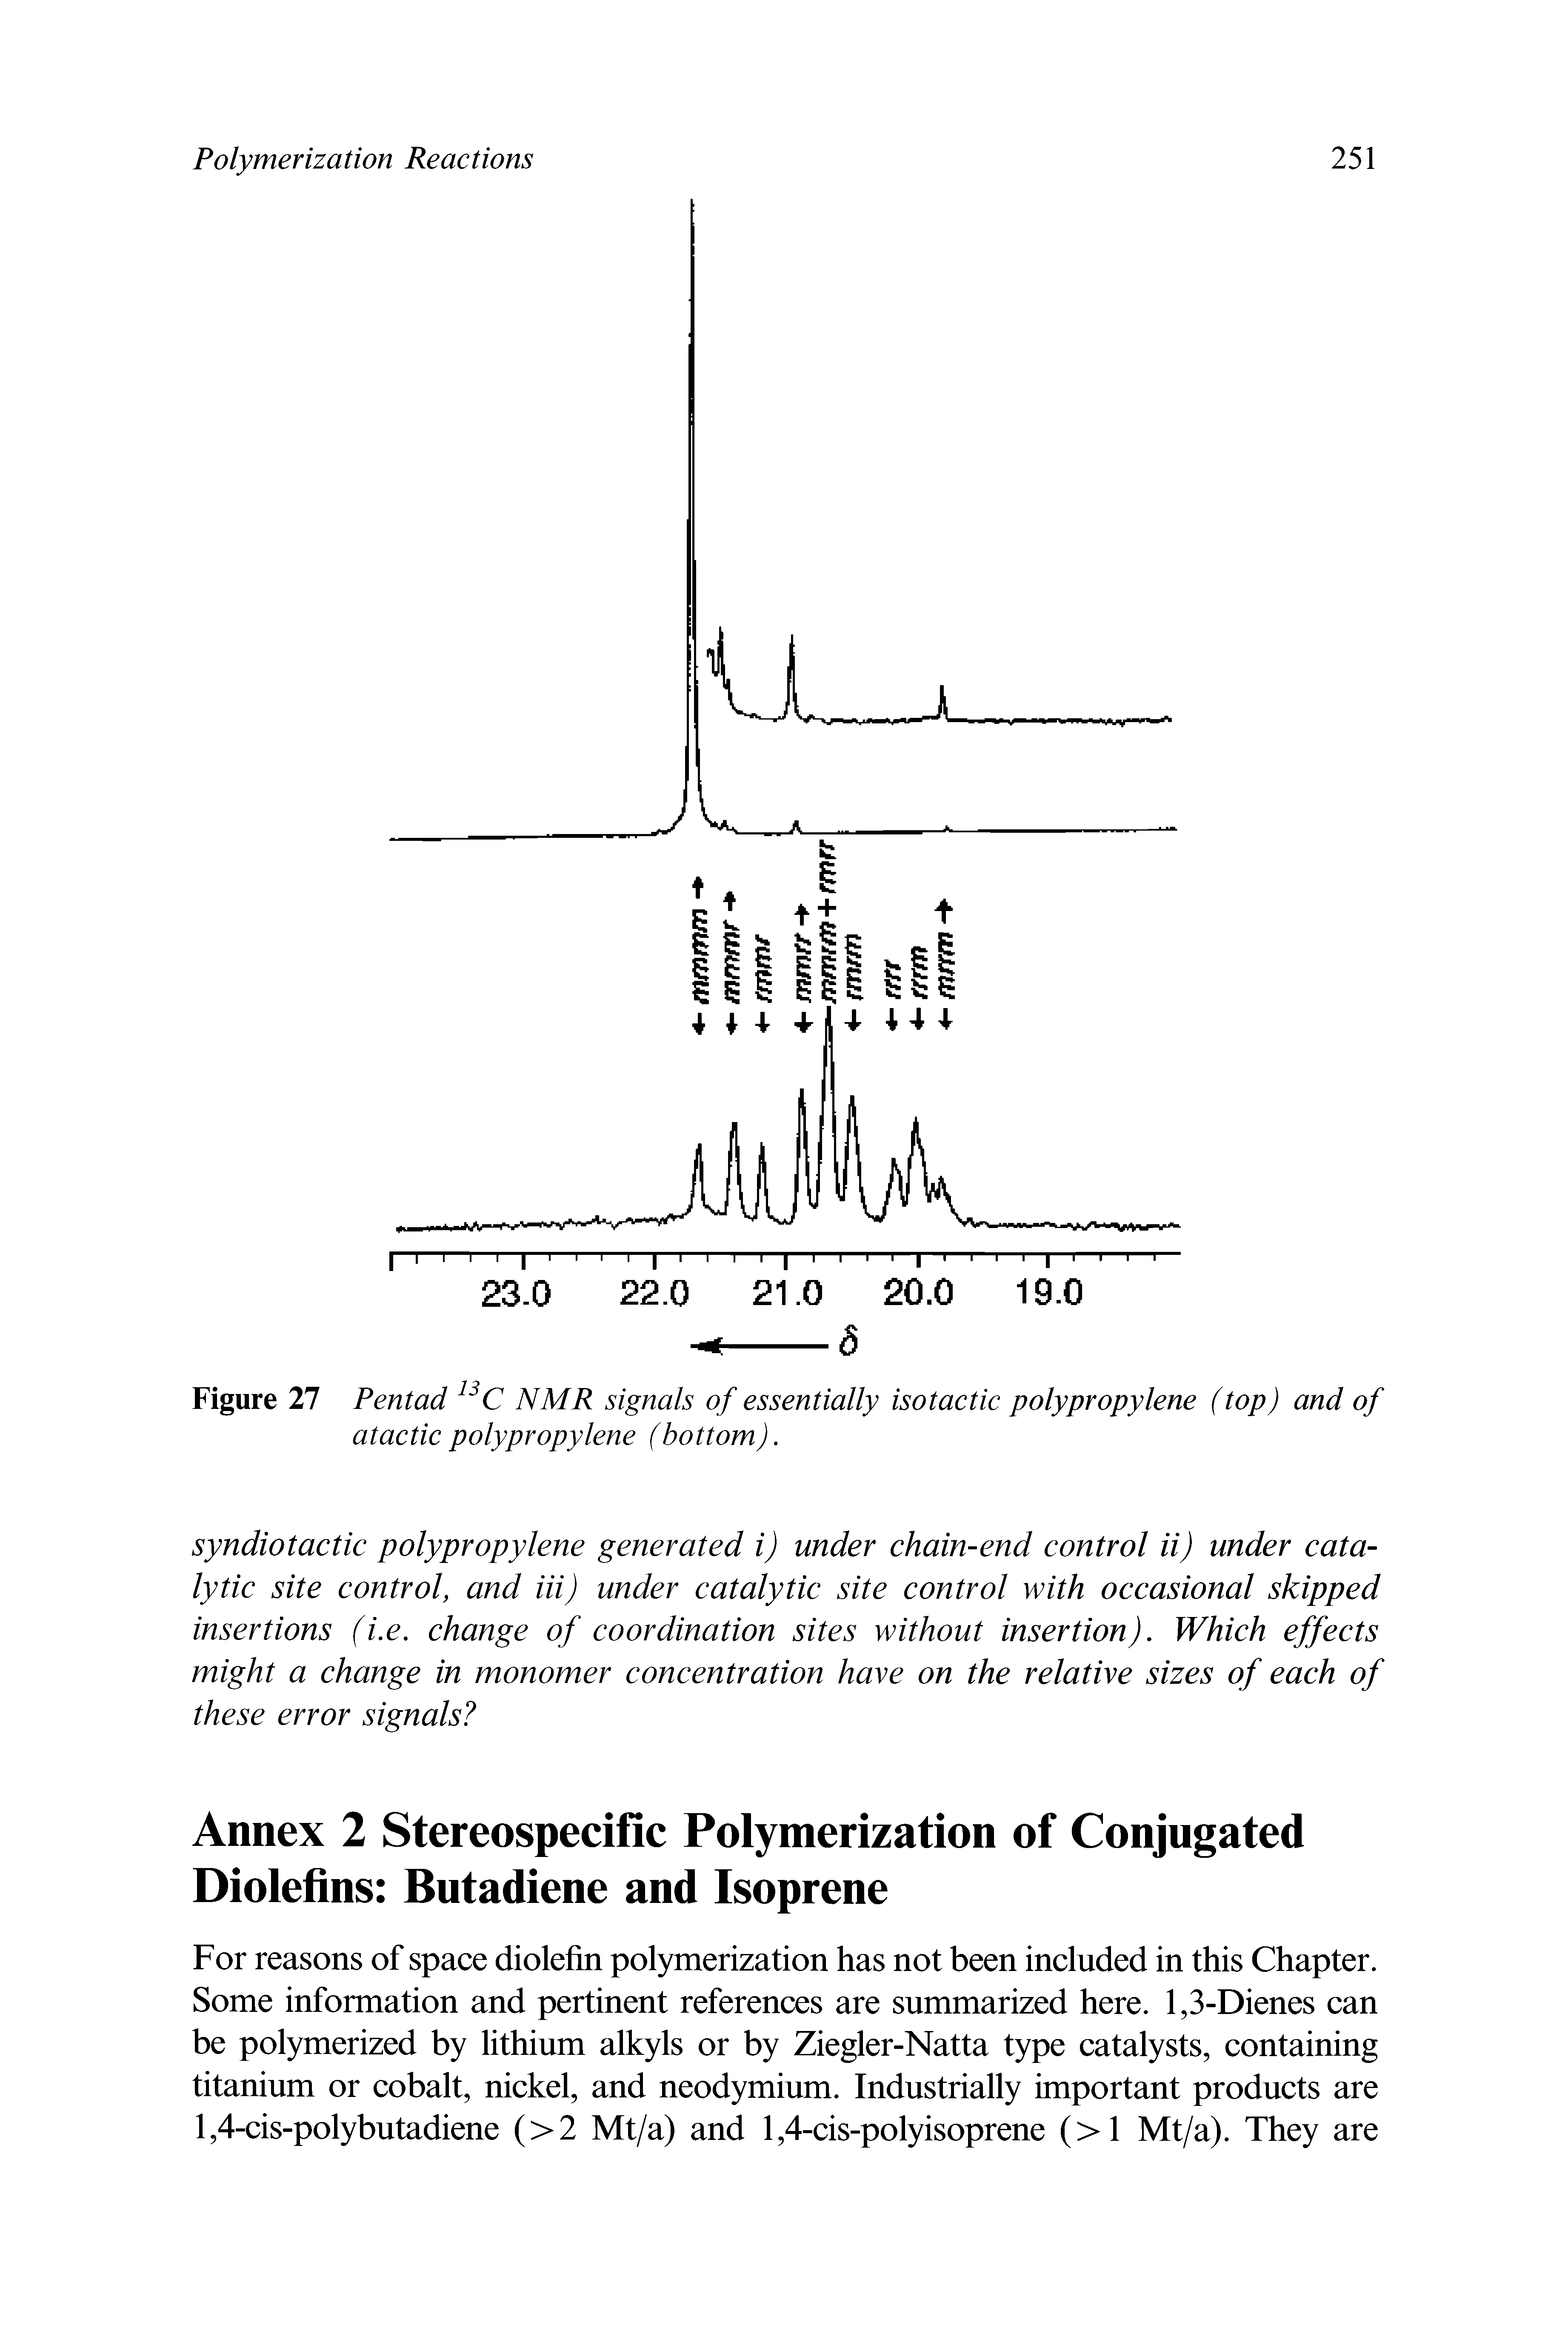 Figure 27 Pentad NMR signals of essentially isotactic polypropylene (top) and of atactic polypropylene (bottom).